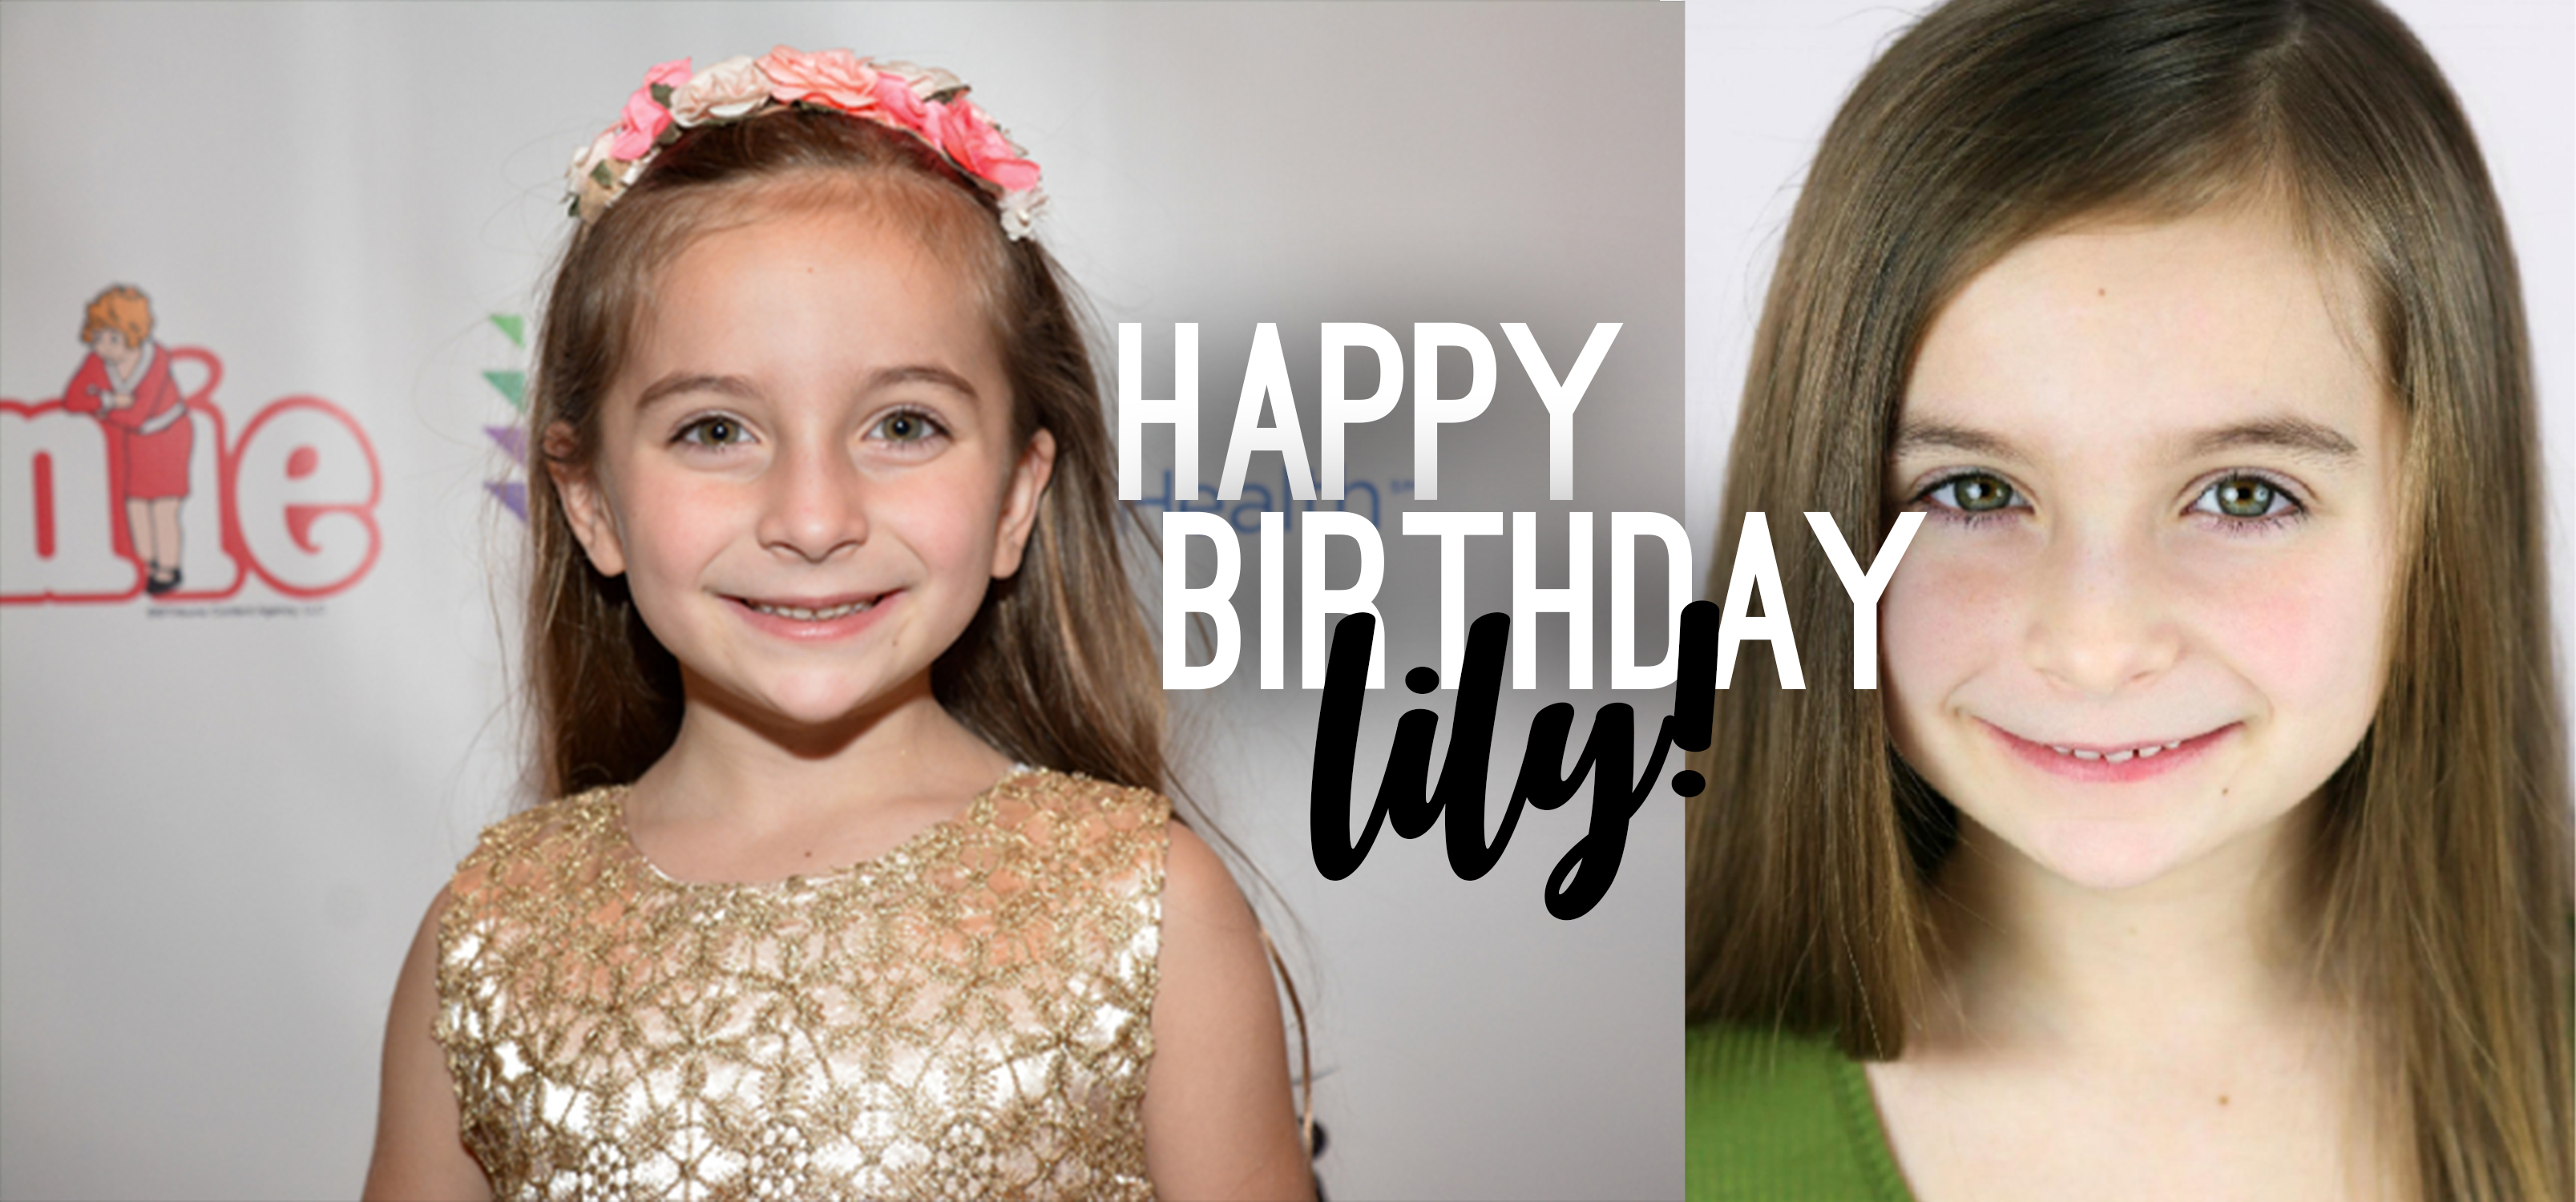 Happy Birthday to Lily Tamburo, WAITRESS Auditions in Spokane, and more!